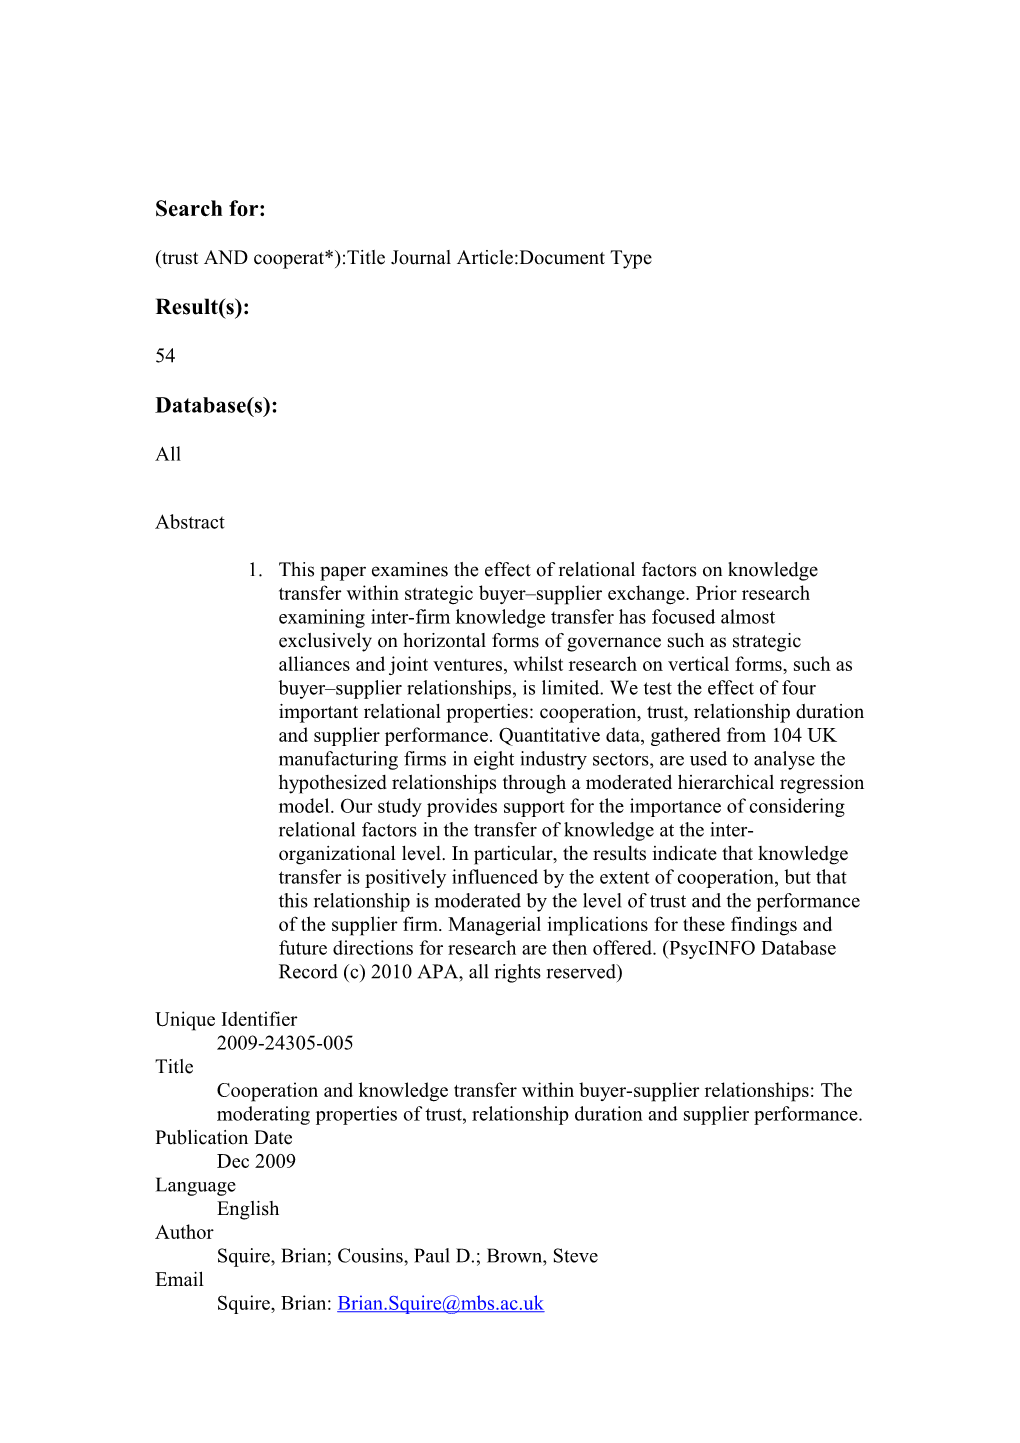 (Trust and Cooperat*):Title Journal Article:Document Type